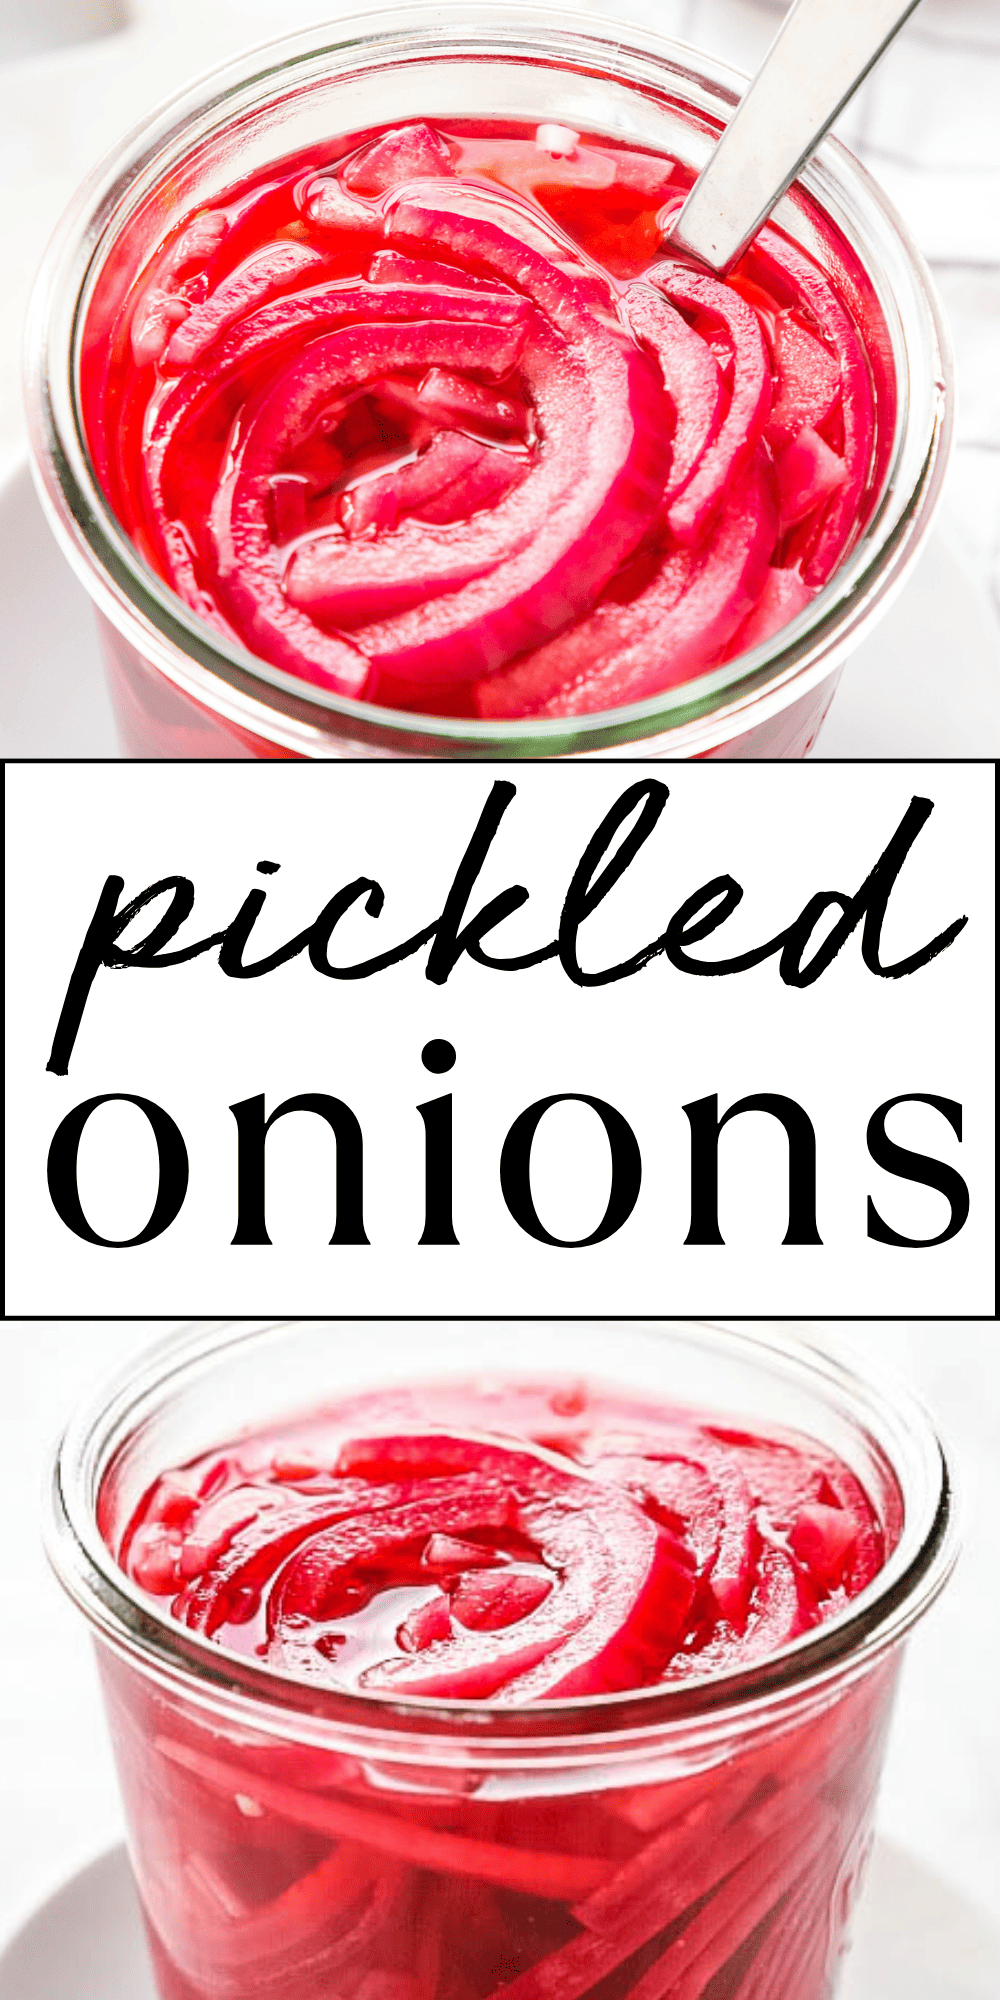 This Pickled Red Onions recipe is a quick and easy way to make delicious pickled onions to serve with sandwiches, wraps, tacos and more! Easy to make in minutes! Recipe from thebusybaker.ca! #pickledonions #easypickledonions #quickandeasypickledonions #pickledredonions #pickledonionsrecipe #condiment #pickles #pickling #vinegar #homesteading via @busybakerblog